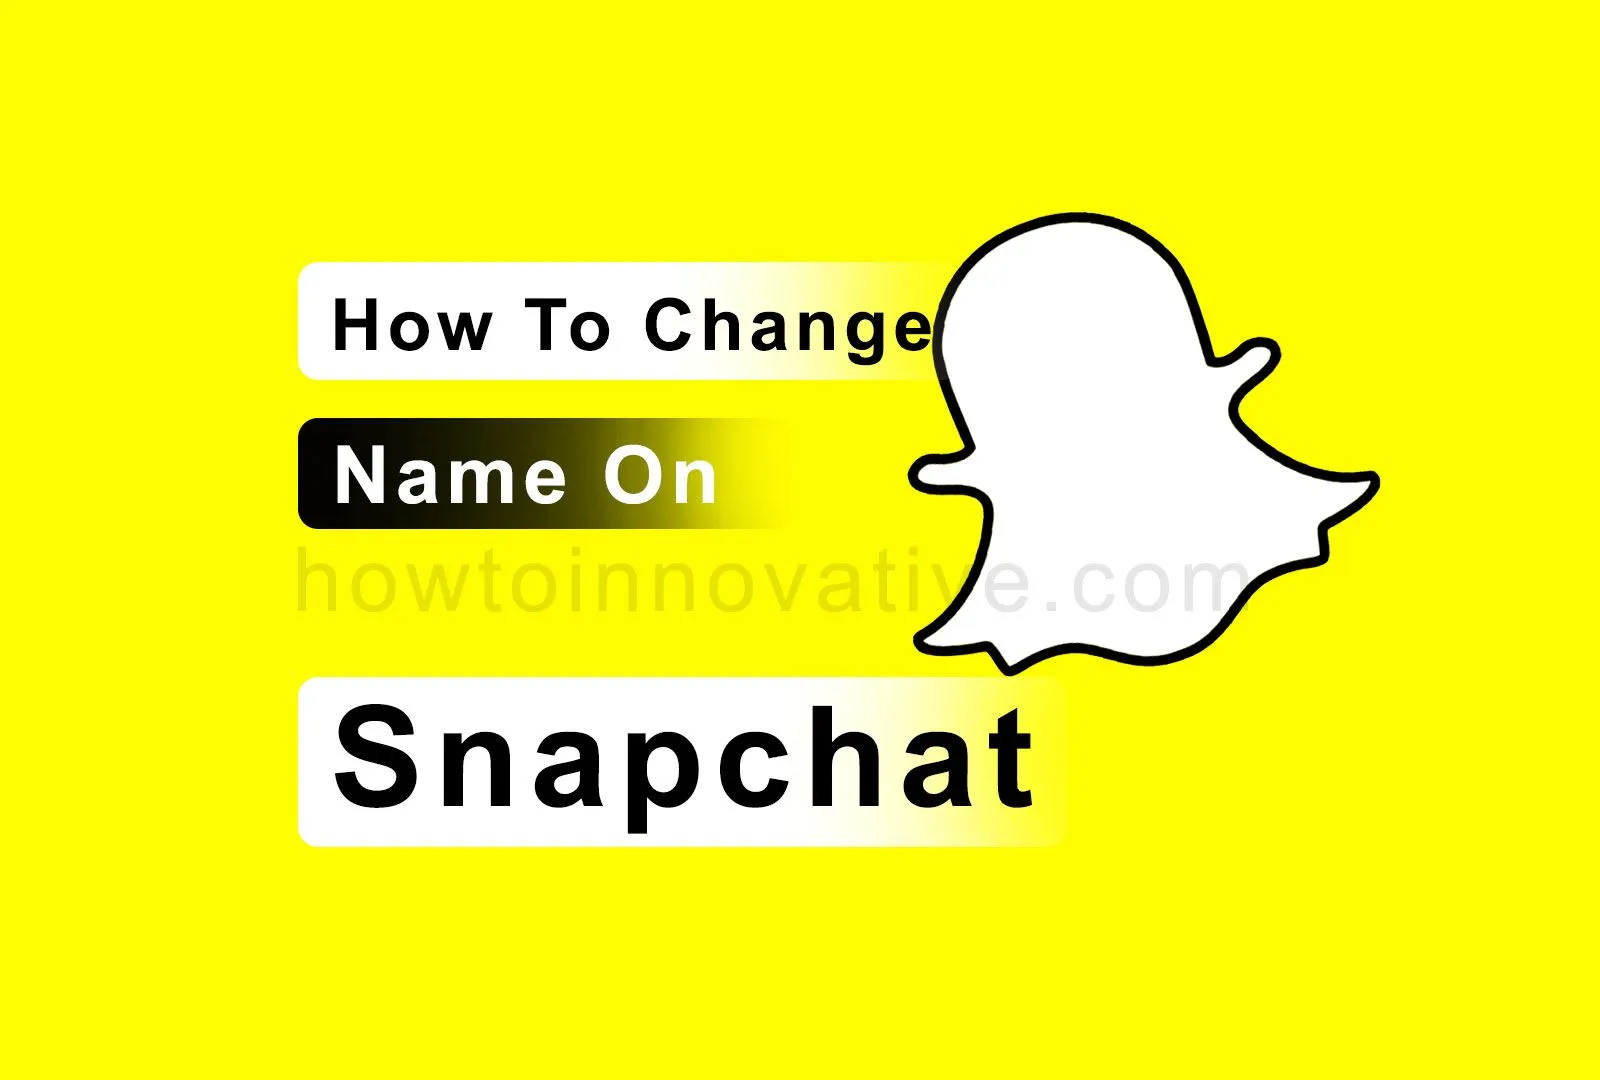 How To Change Name On Snapchat